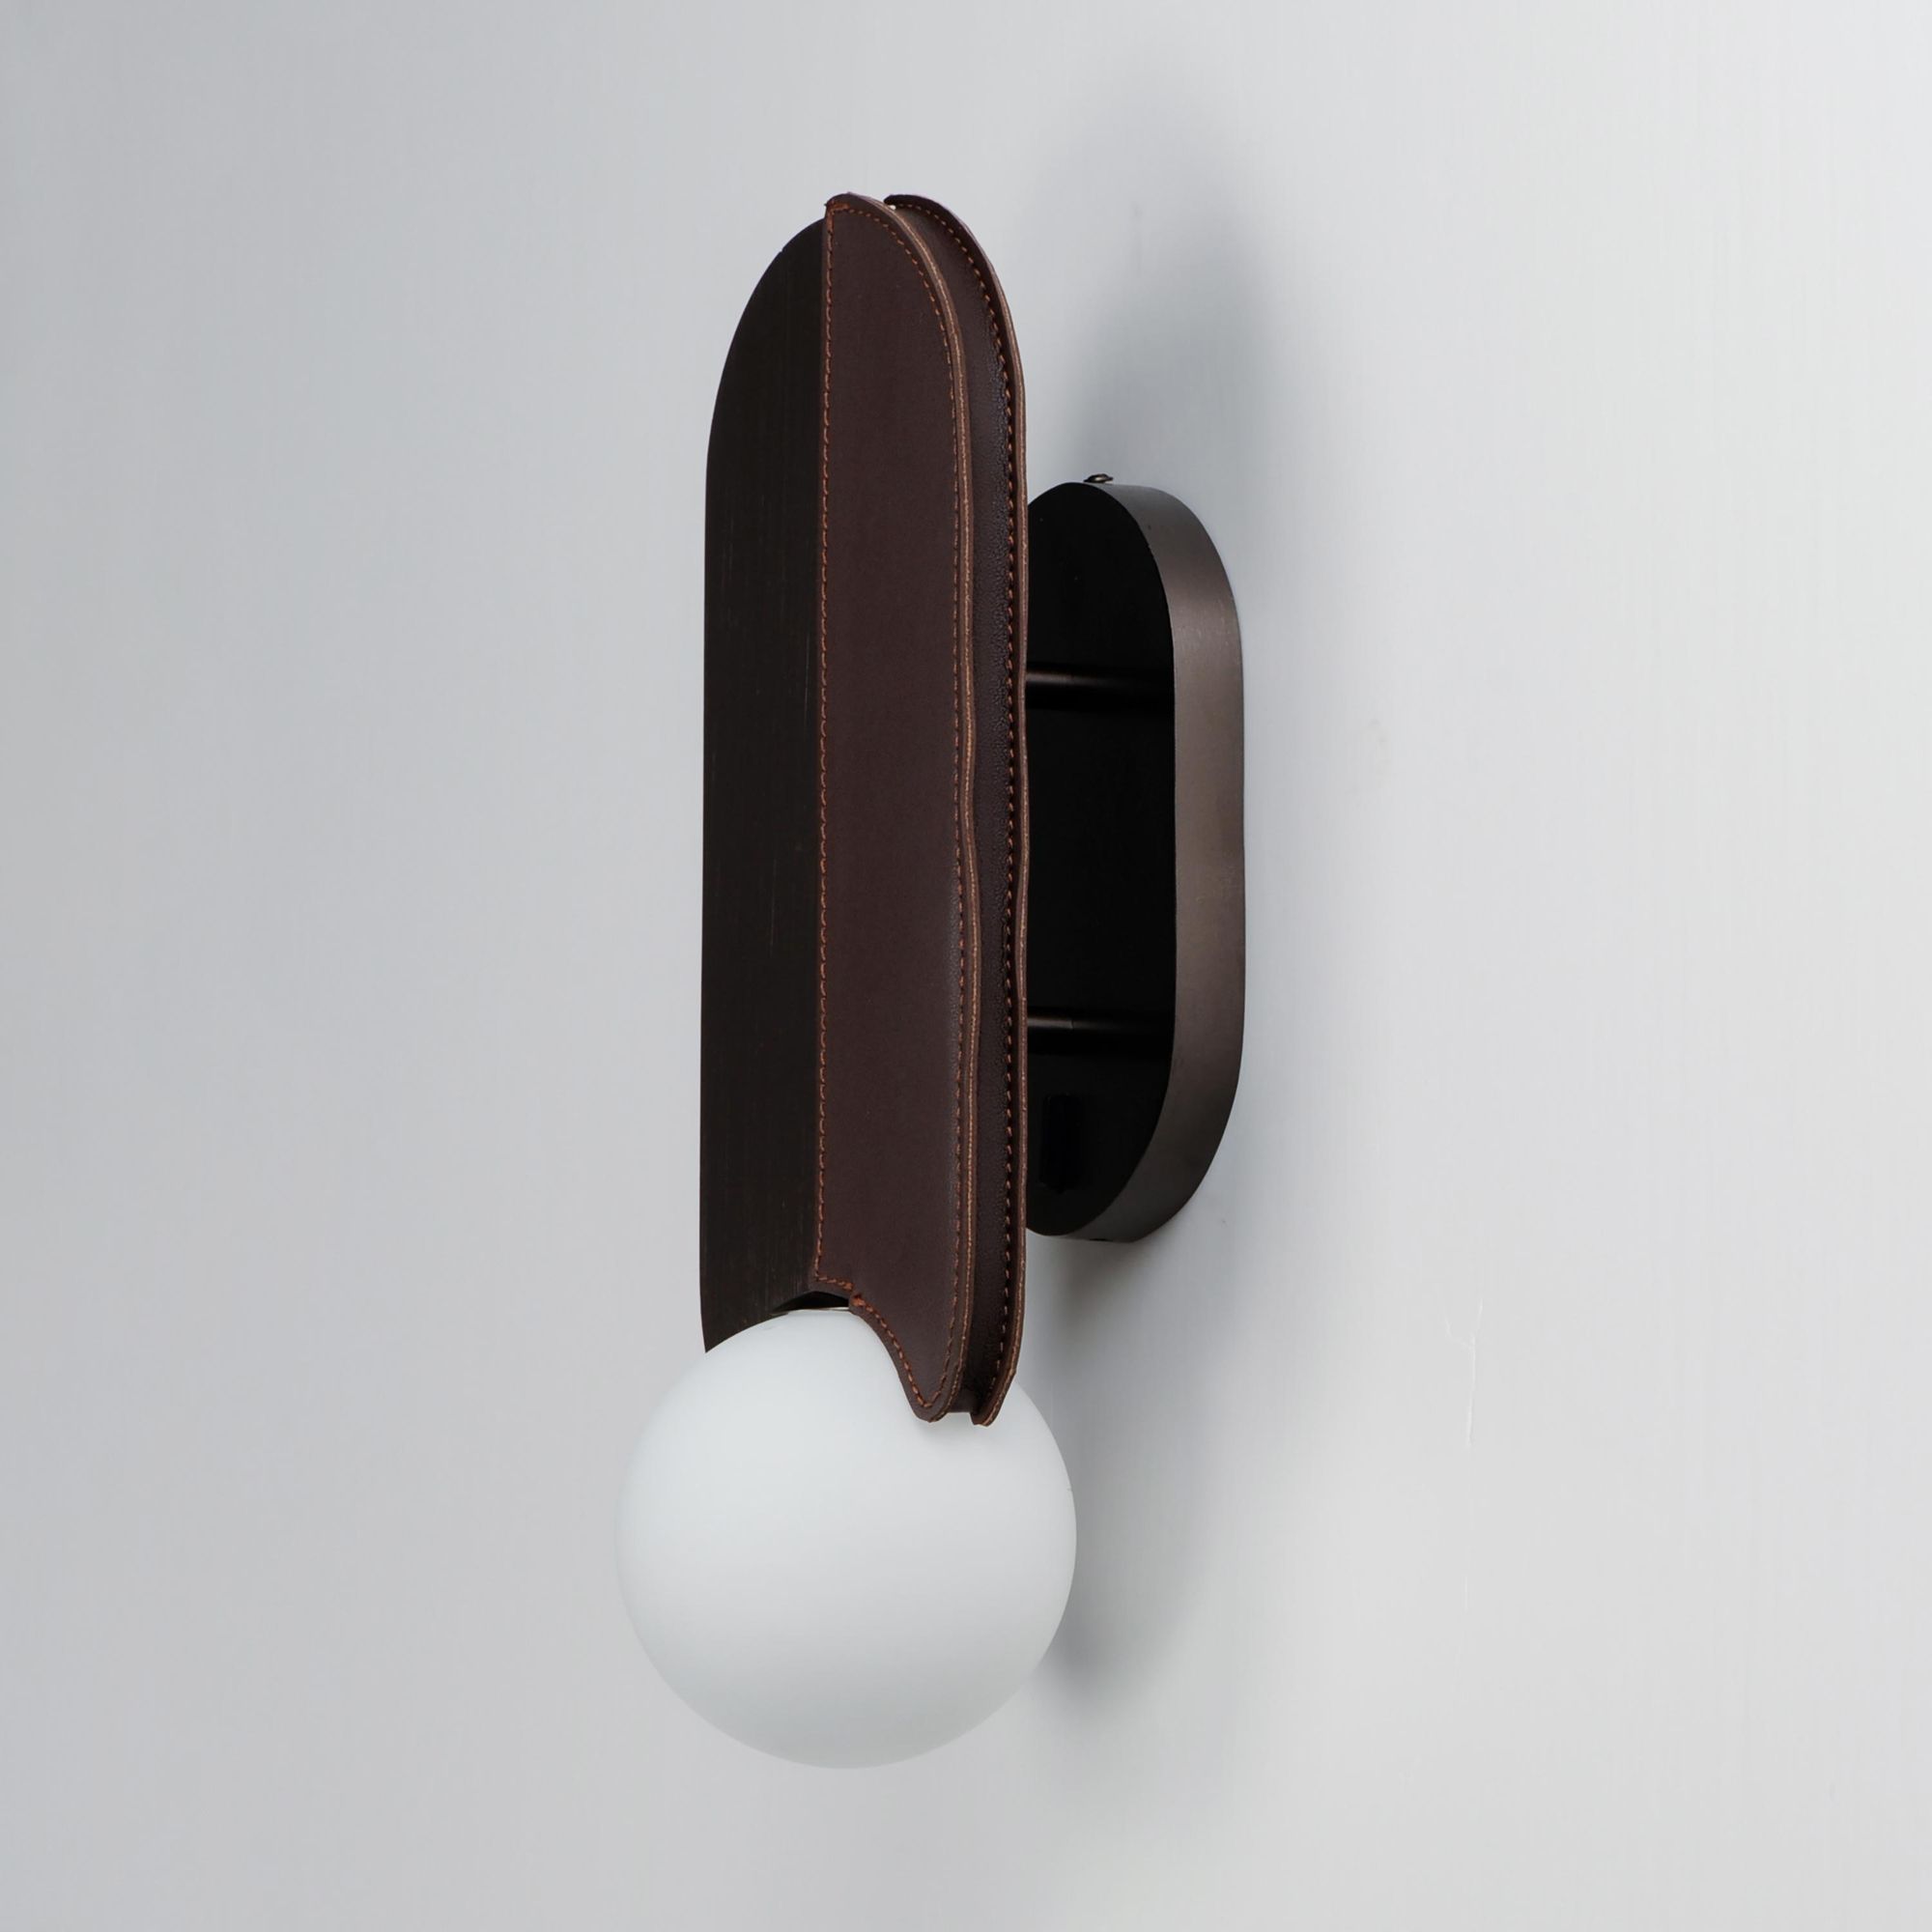 Studio M SM24601BBZ Stitched Down-Light Wall Sconce in Brushed Bronze by Nina Magon